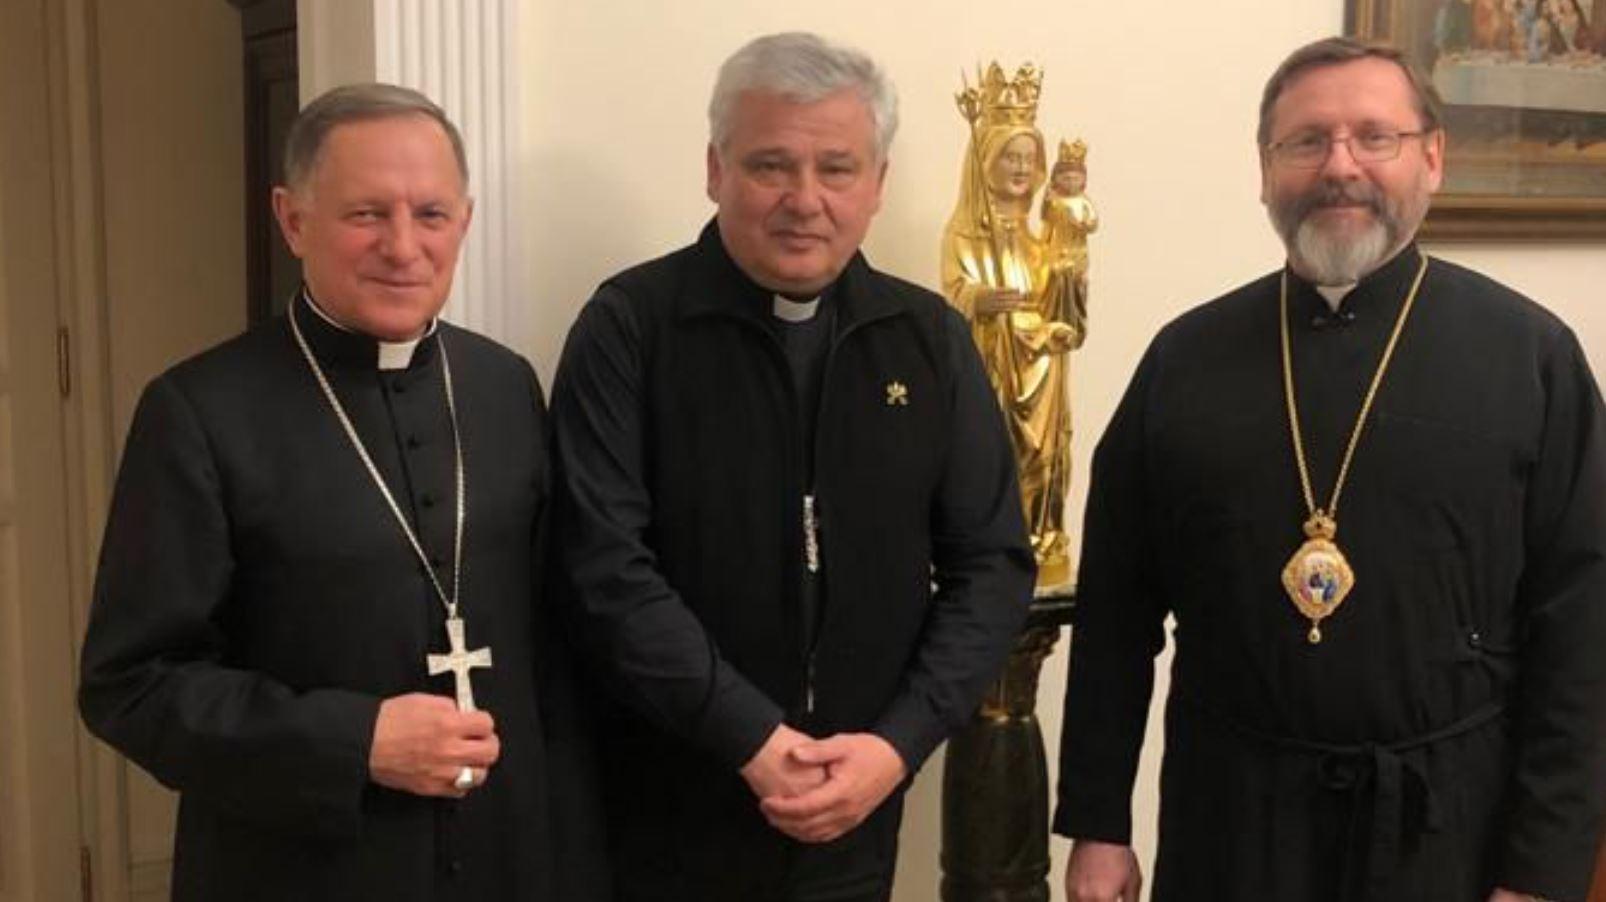 Papal envoy arrives in Ukraine, meets with archbishops in Lviv